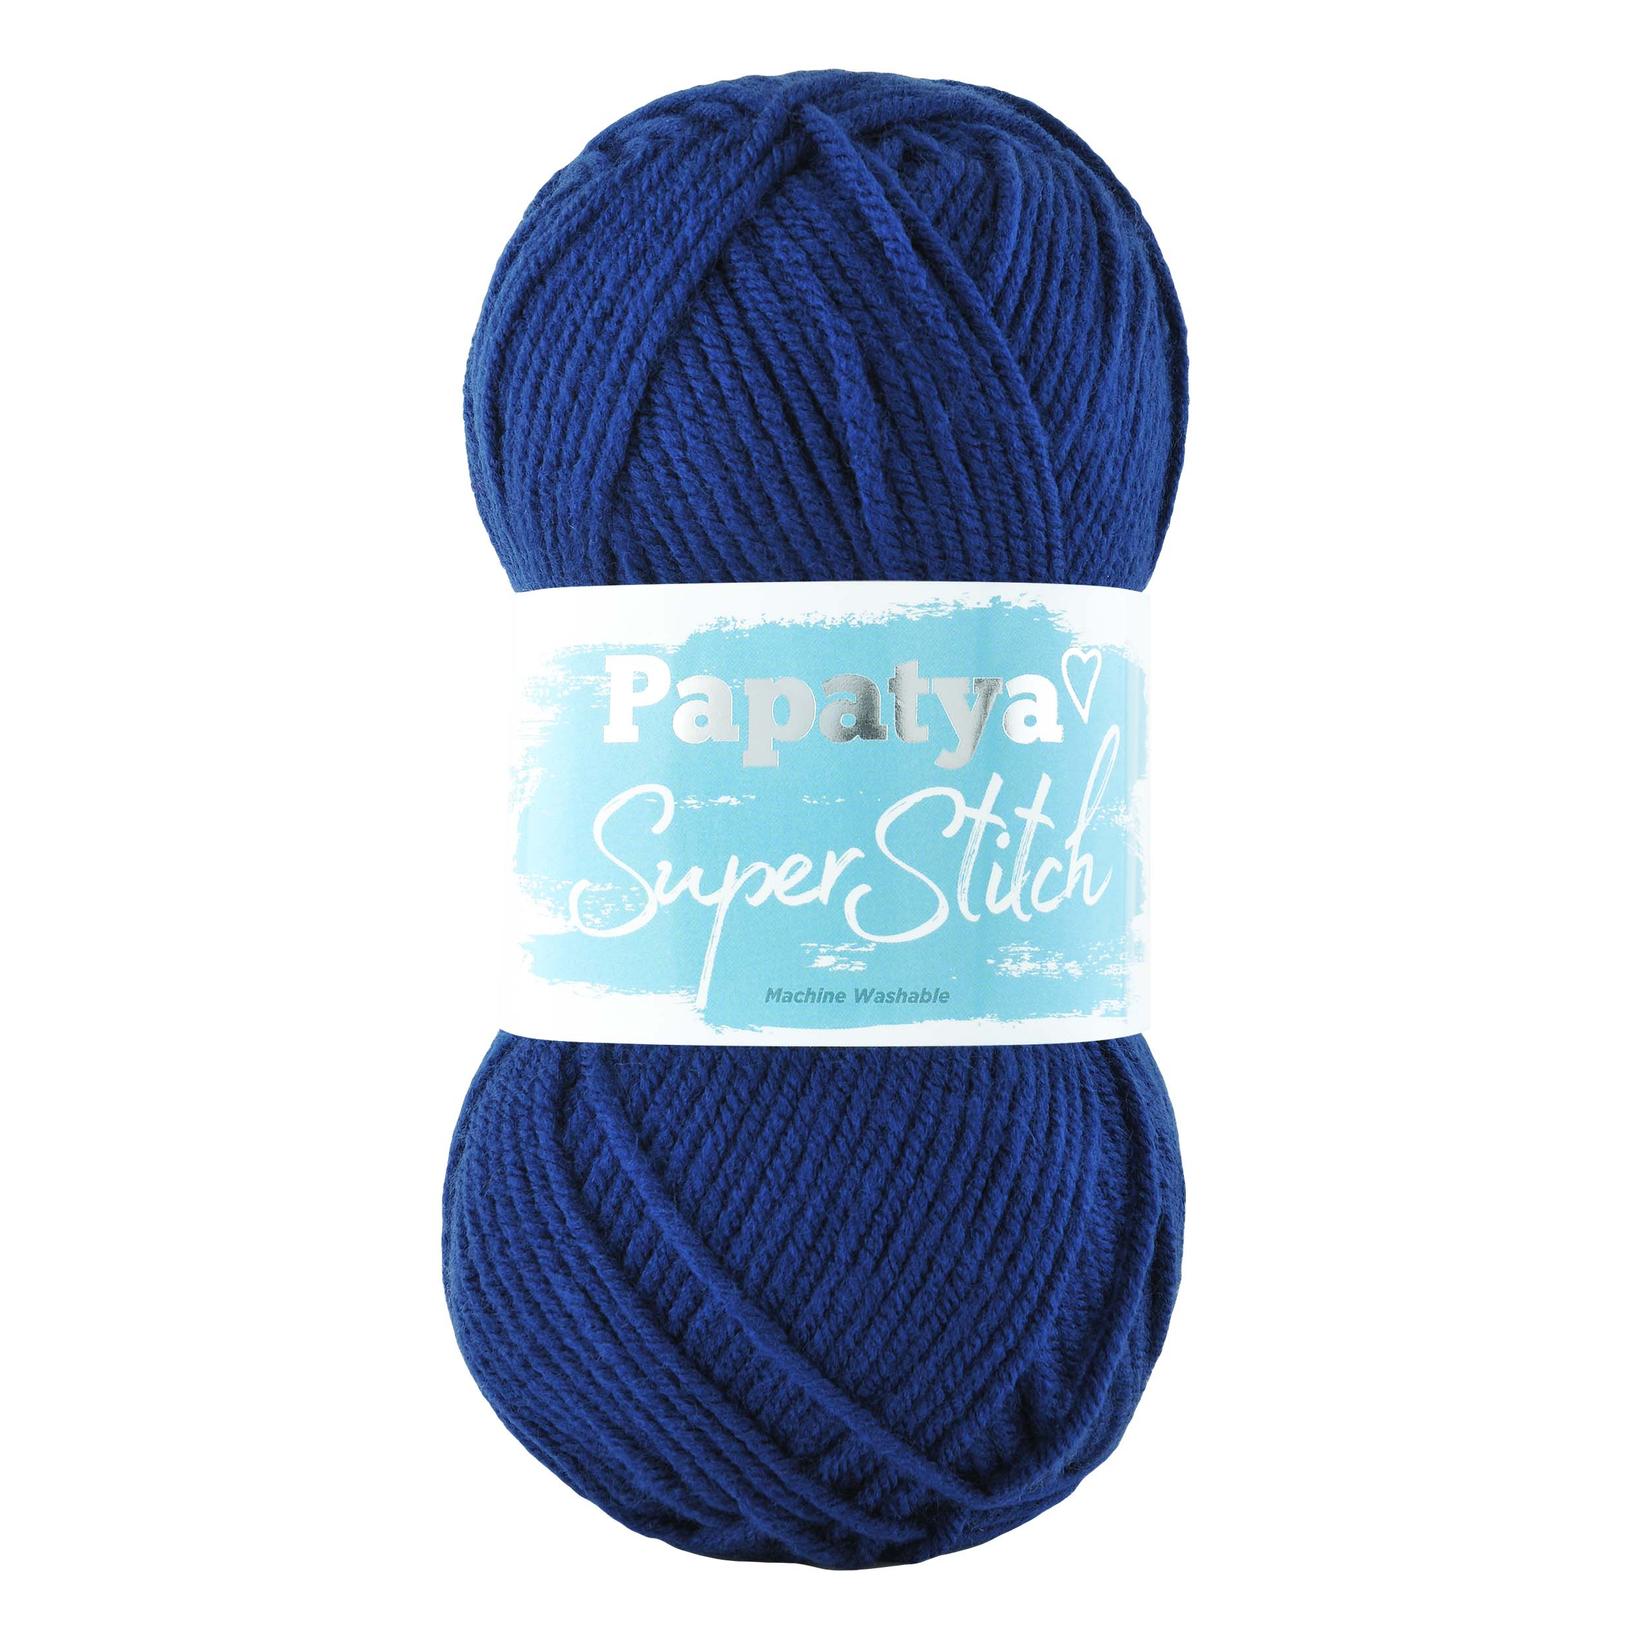 Selected image for PAPATYA Vunica Super Stitch 5280